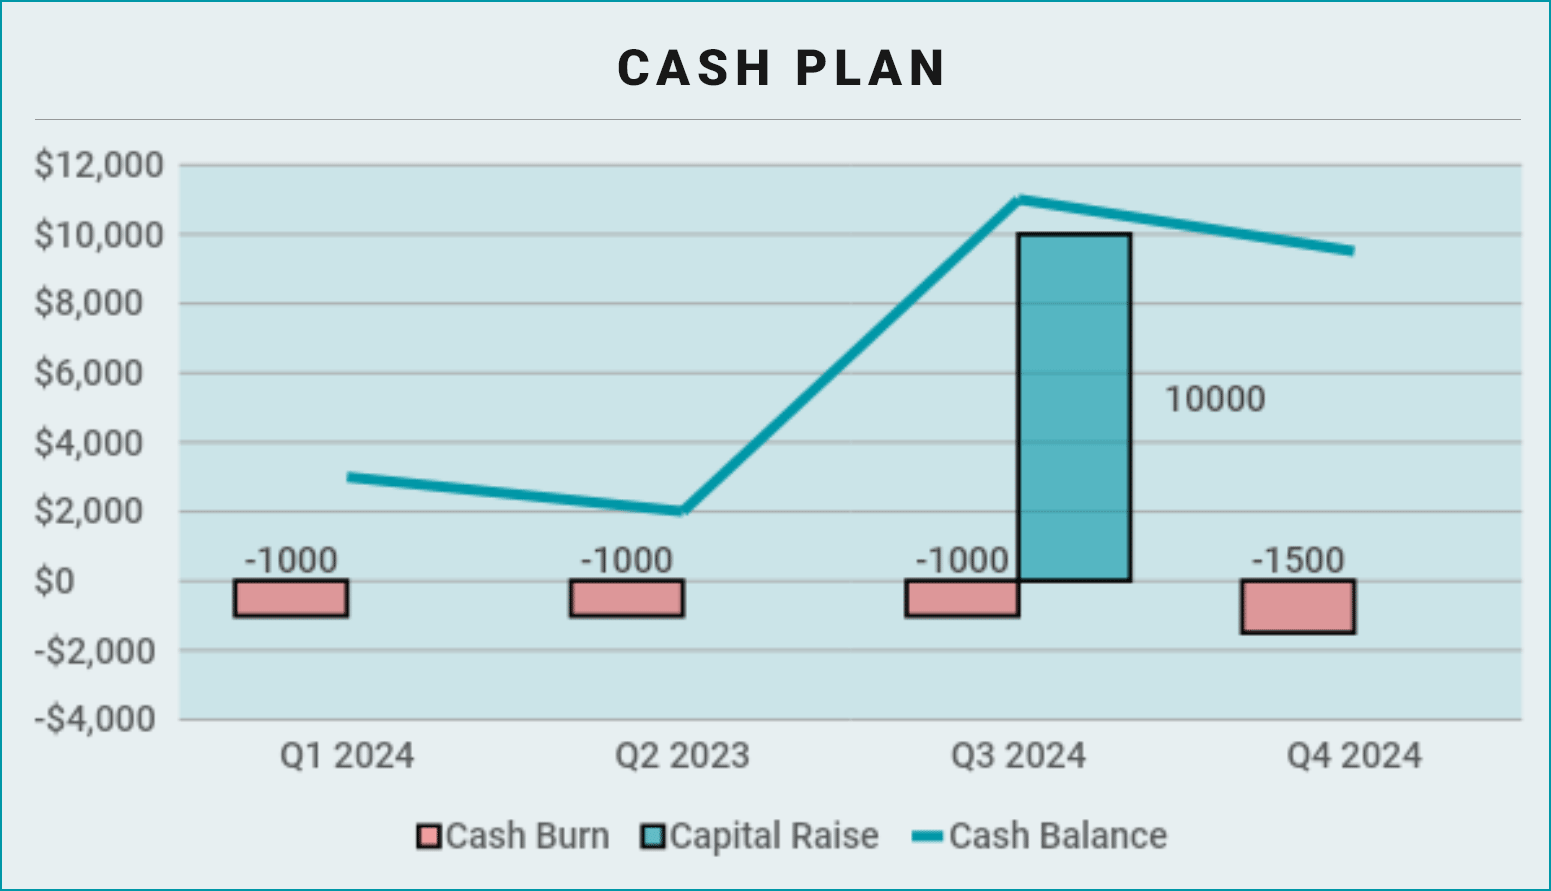 Example of a cash plan for a startup